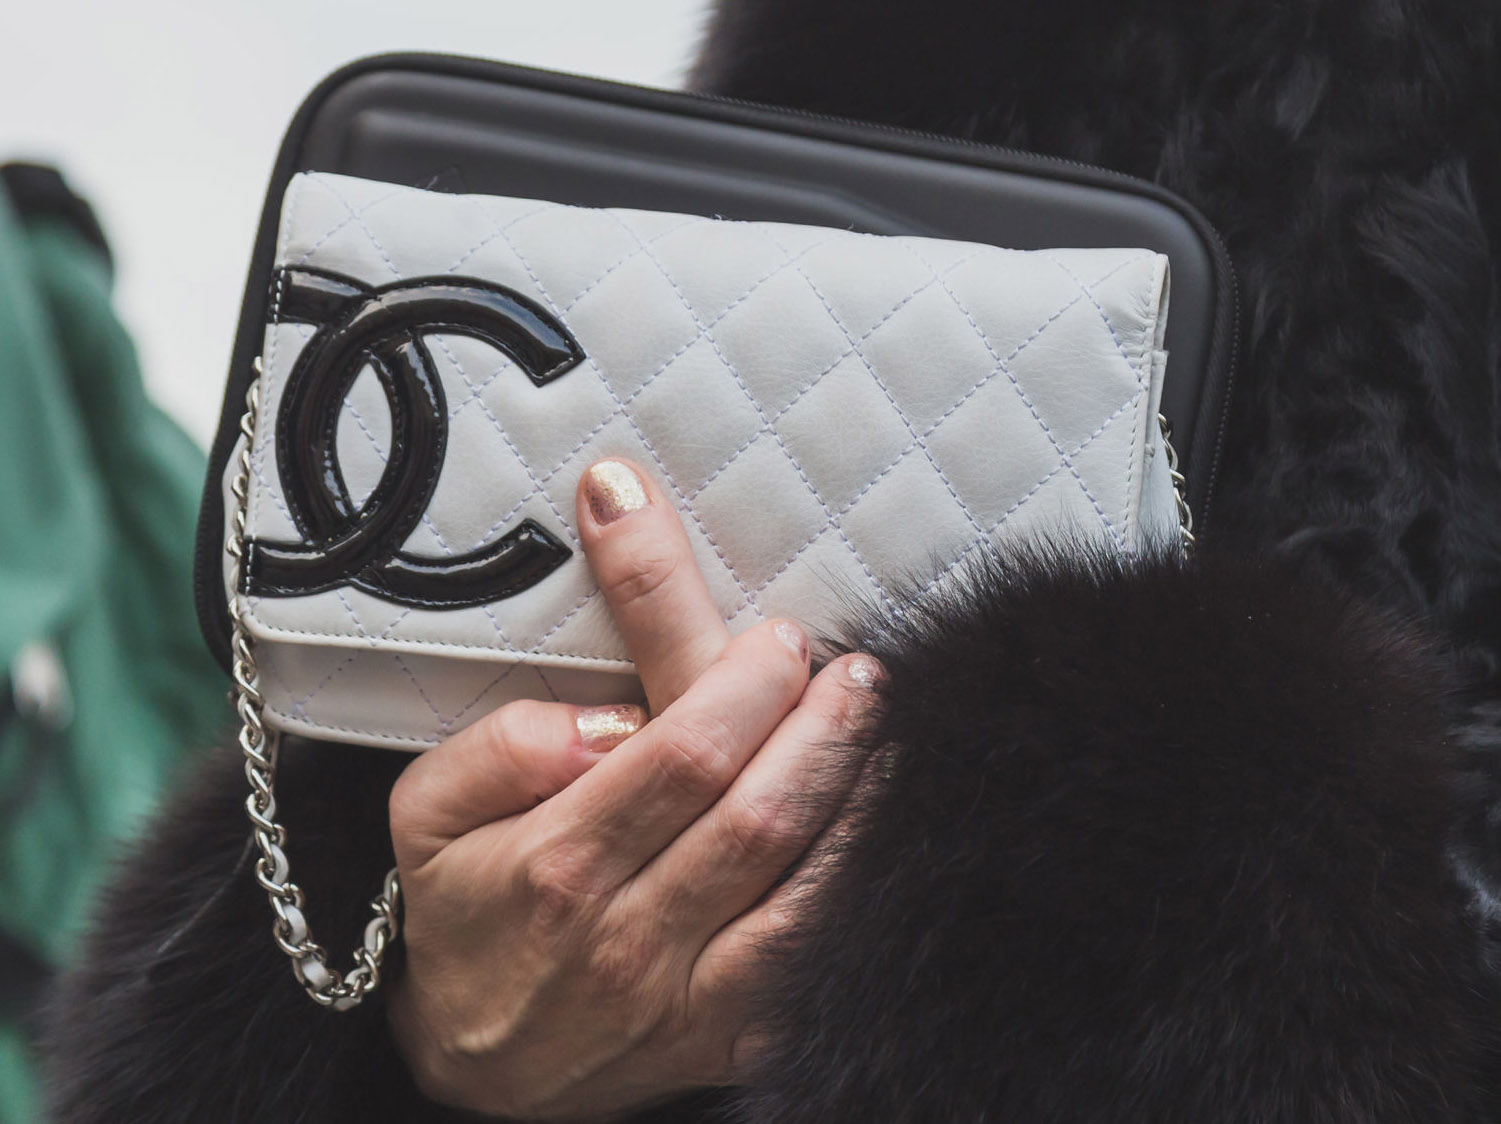 Auckland fashionistas duped by replica Chanel handbags - NZ Herald